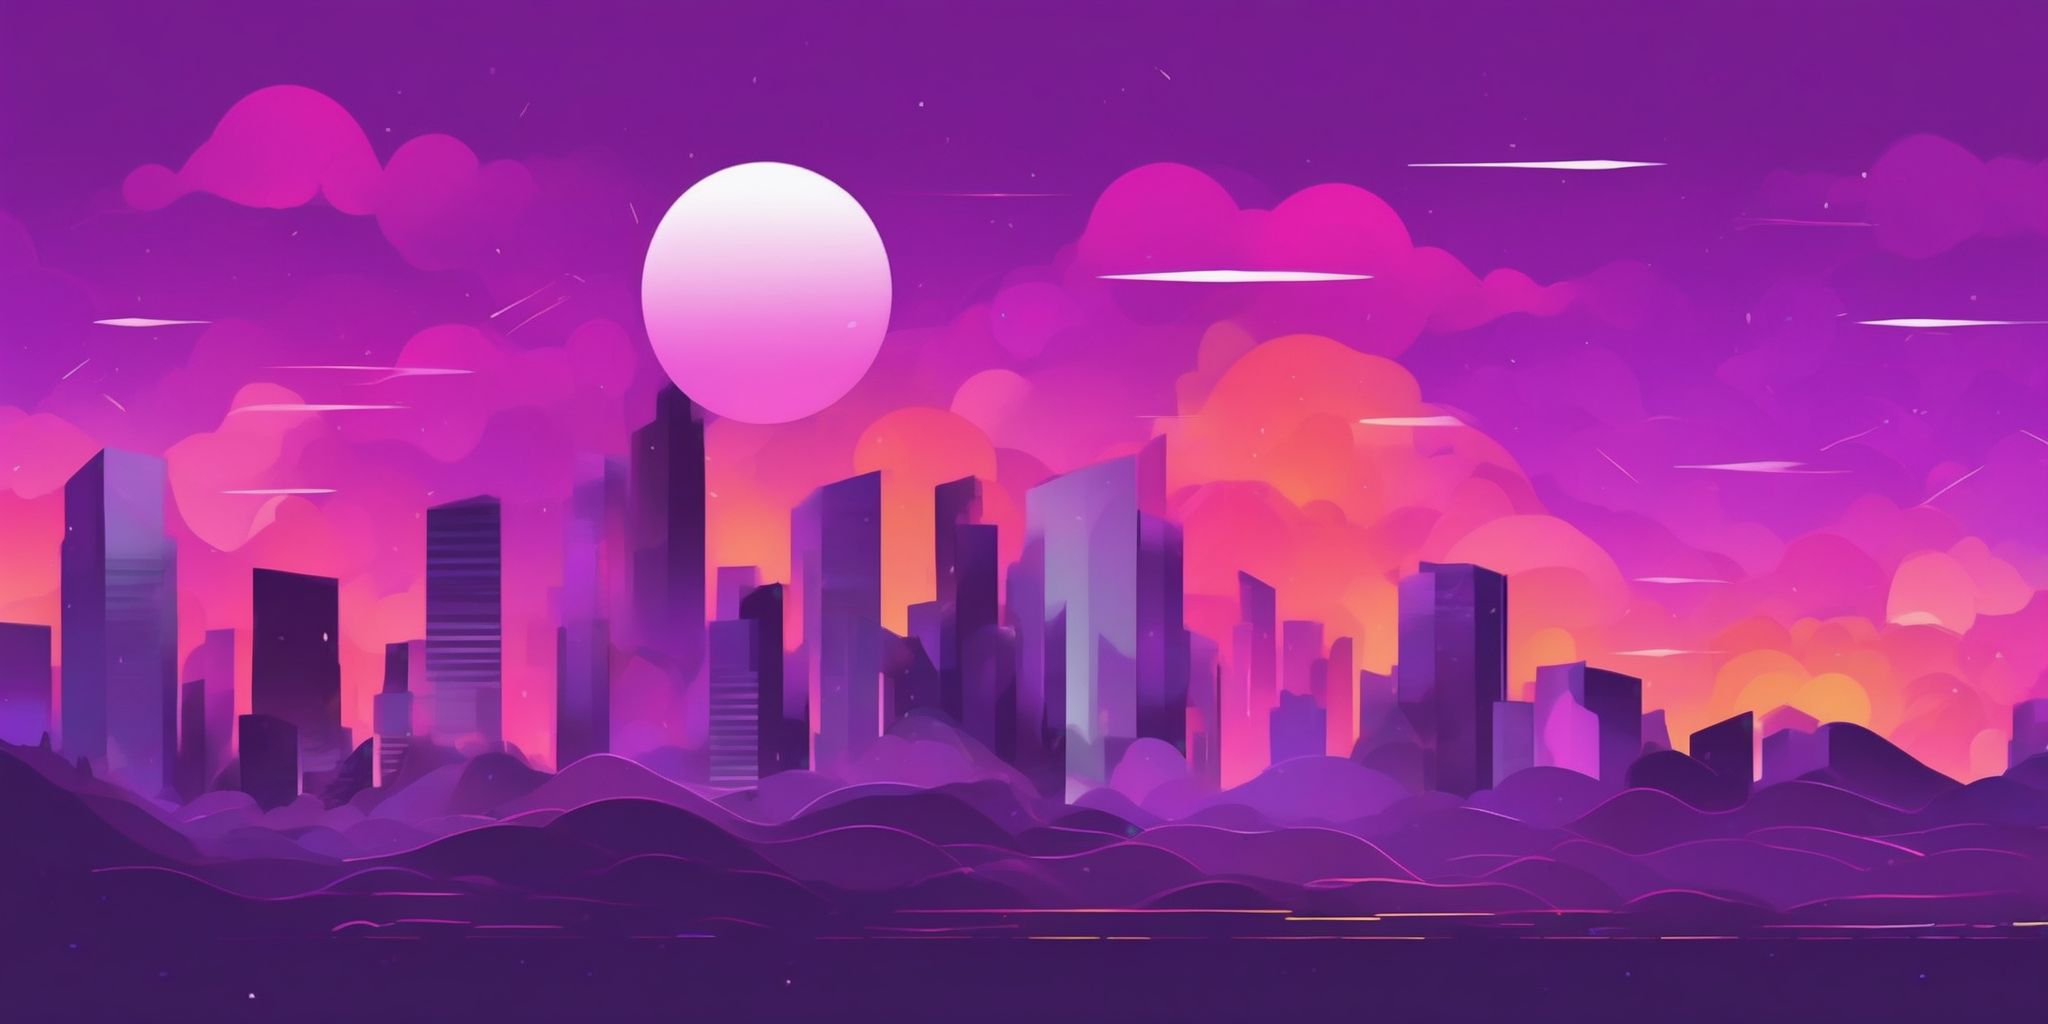 Noise in flat illustration style, colorful purple gradient colors